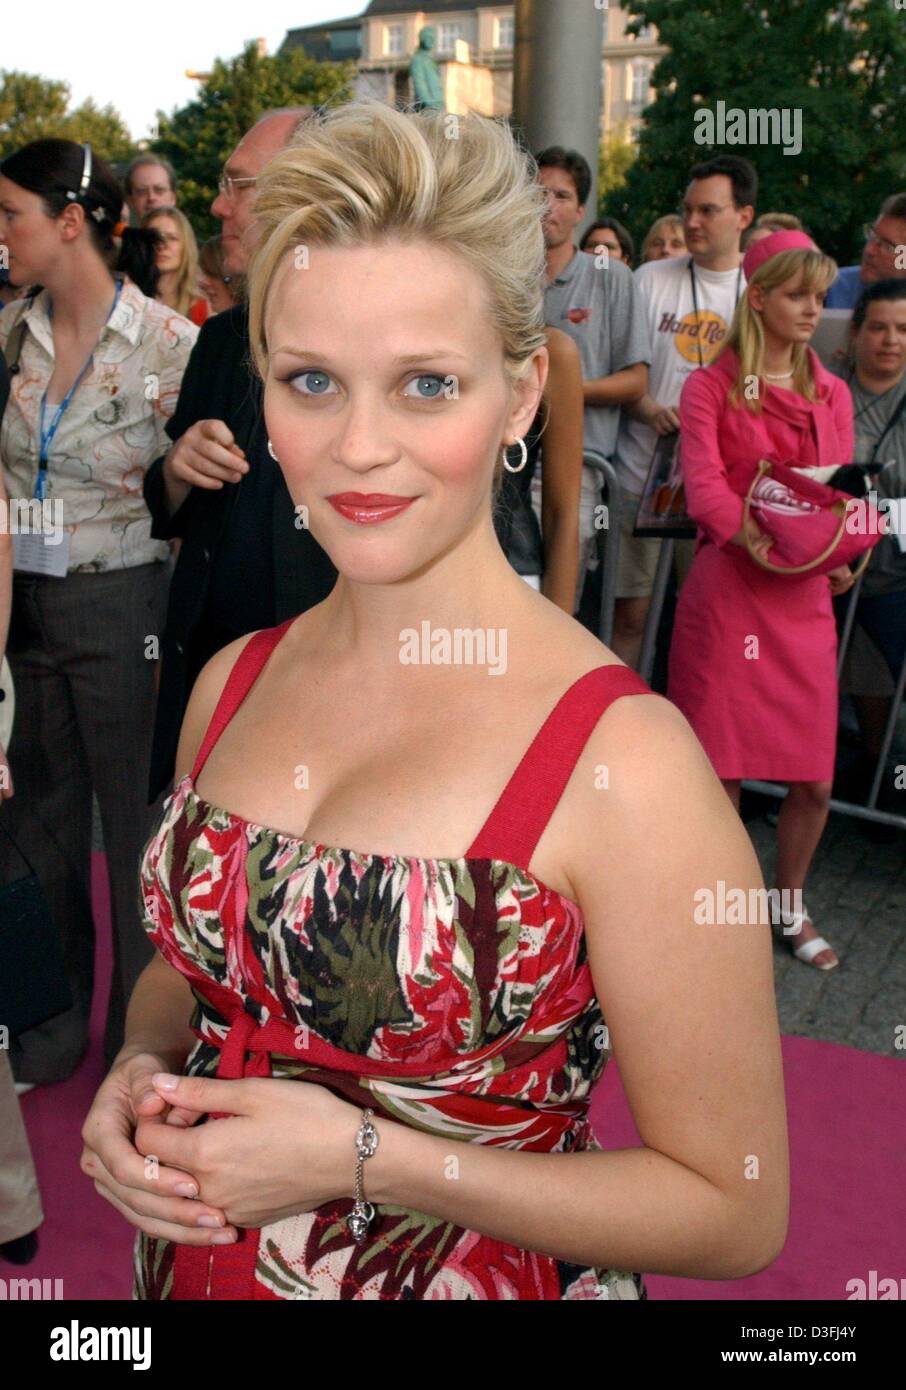 (dpa) - US Hollywood actress Reese Witherspoon arrives at the premiere of her film 'Legally Blond 2' at the Cinnemaxx cinema in Hamburg, Germany, 19 July 2003. The film, for which Witherspoon was also the acting executive producer, will be released in Germany on 24 July 2003. Witherspoon plays the role of Elle Woods, a blond with a degree from Harvard, who now wants to be involved  Stock Photo